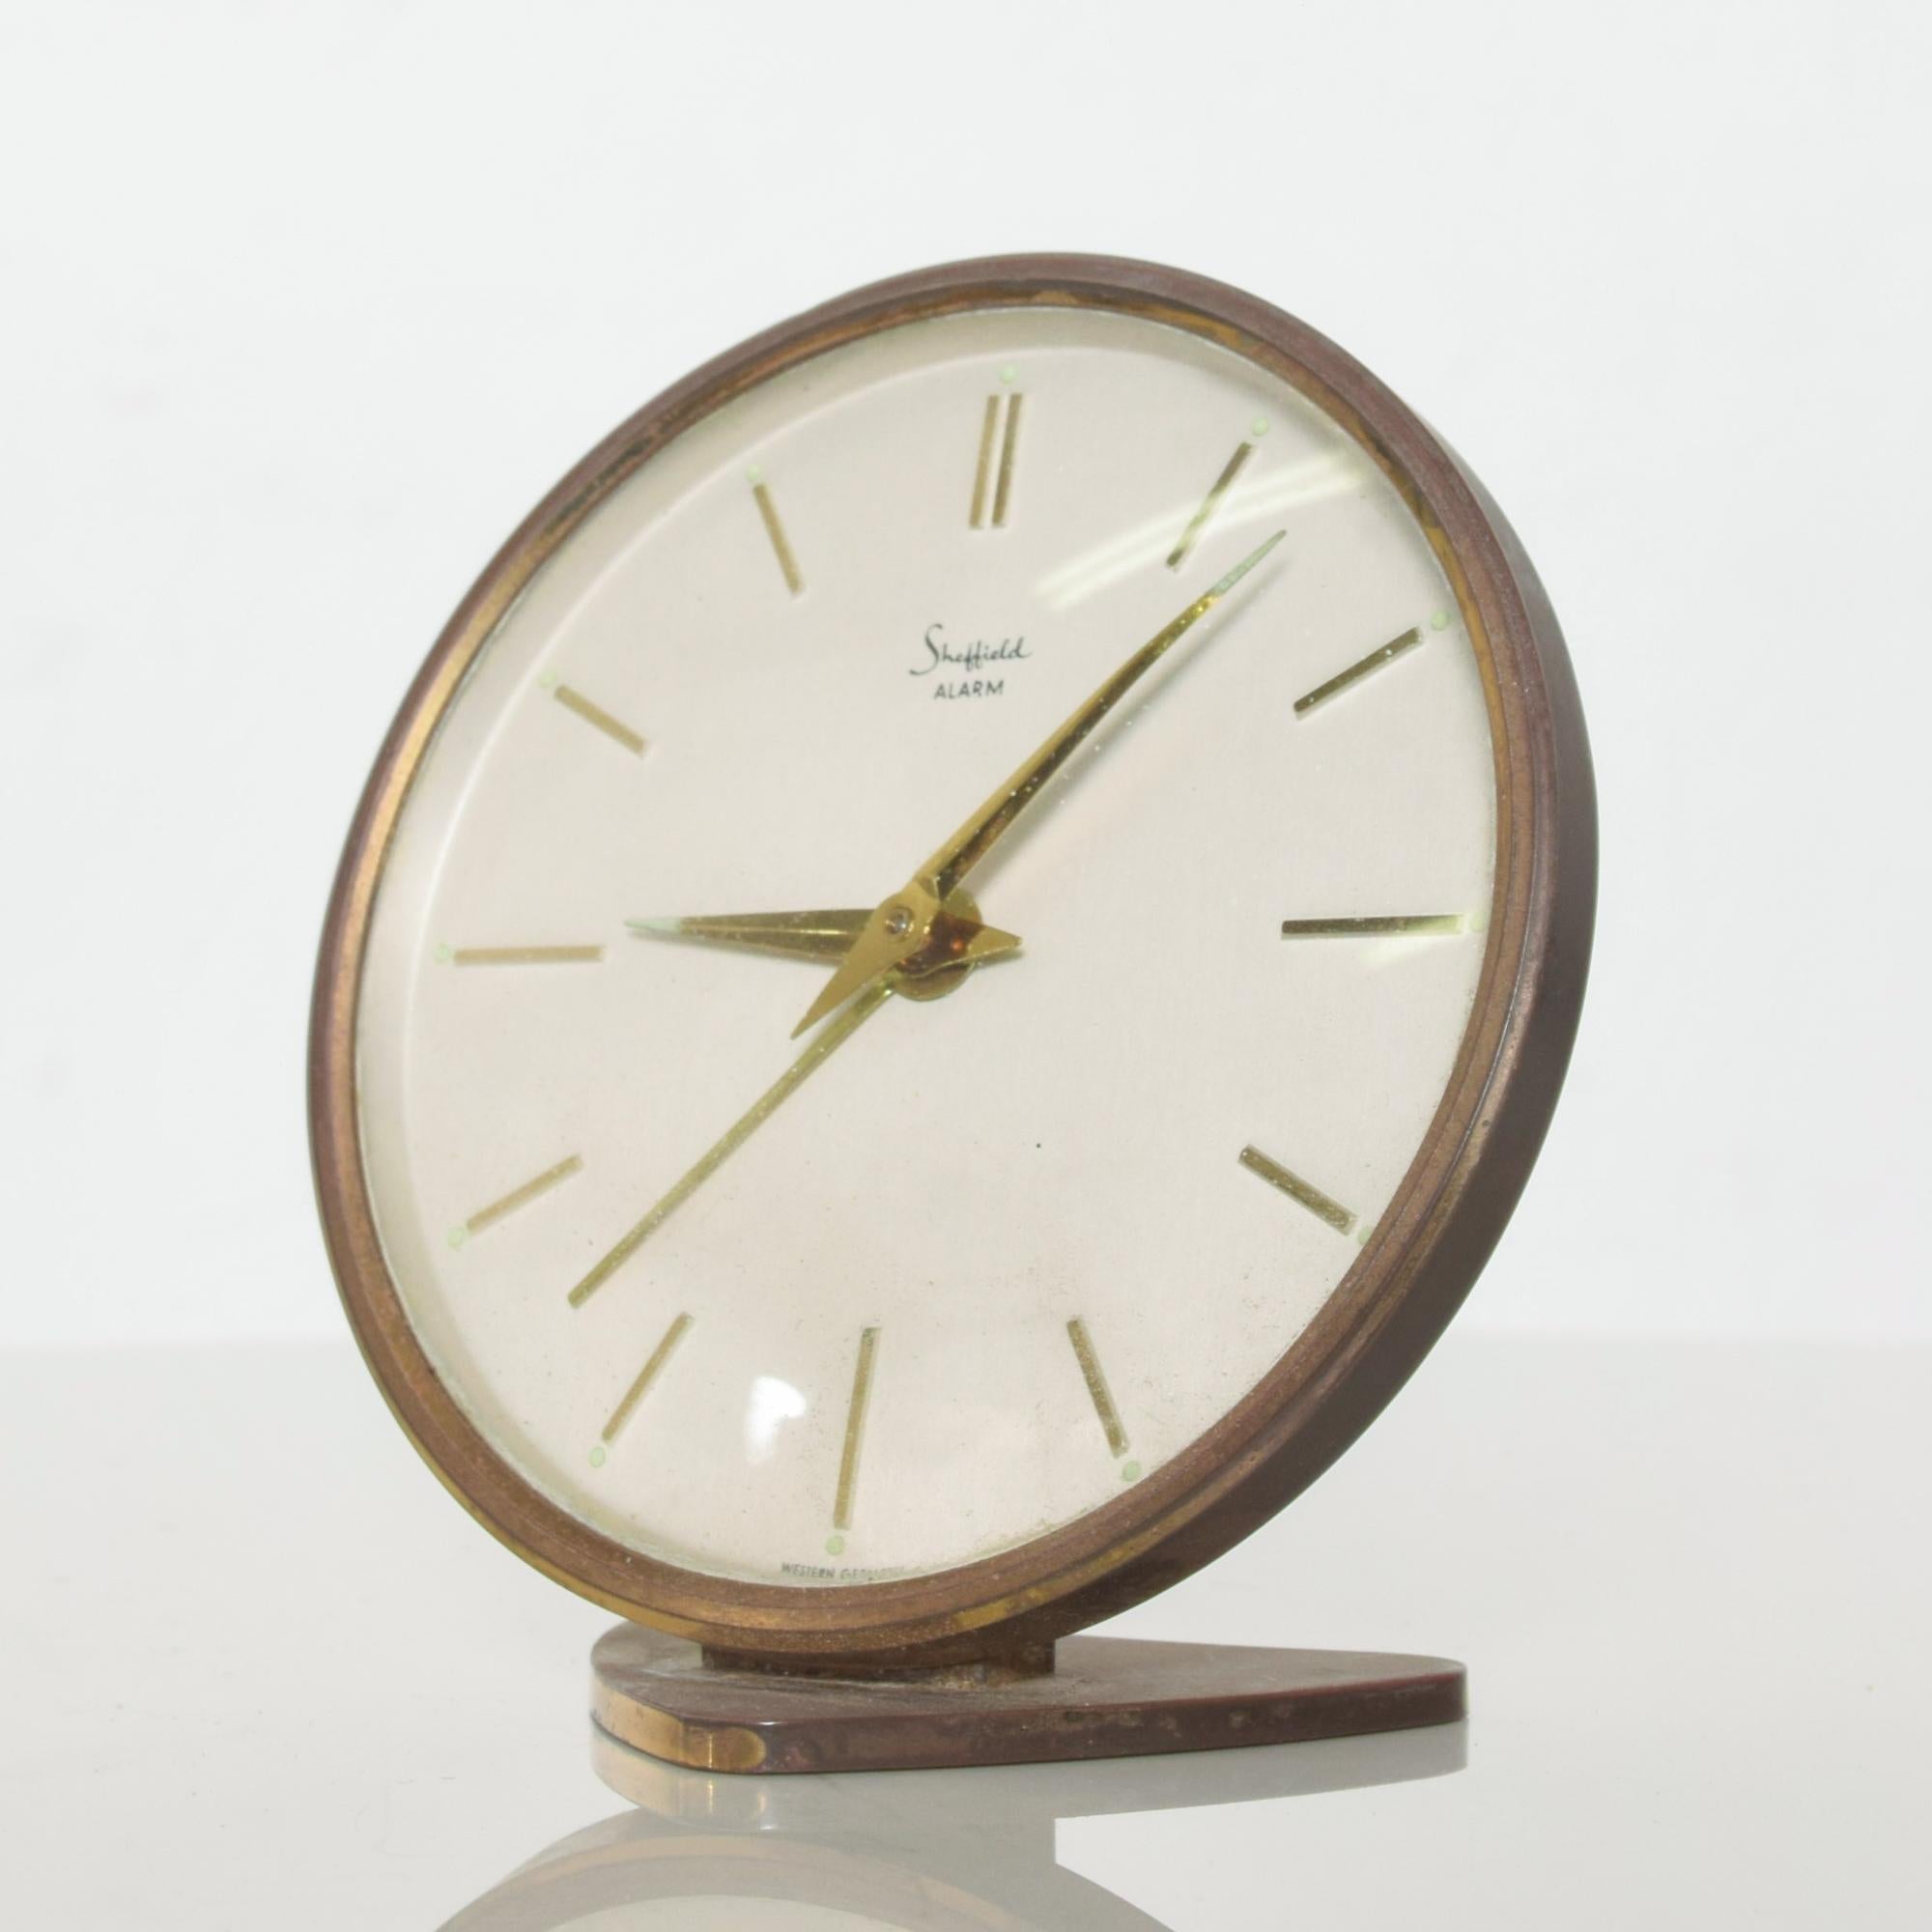 Mid-Century Modern vintage brass alarm table clock simple sculptural shape by Sheffield of Western Germany. Stamped by maker.
Dimensions: 3 1/2